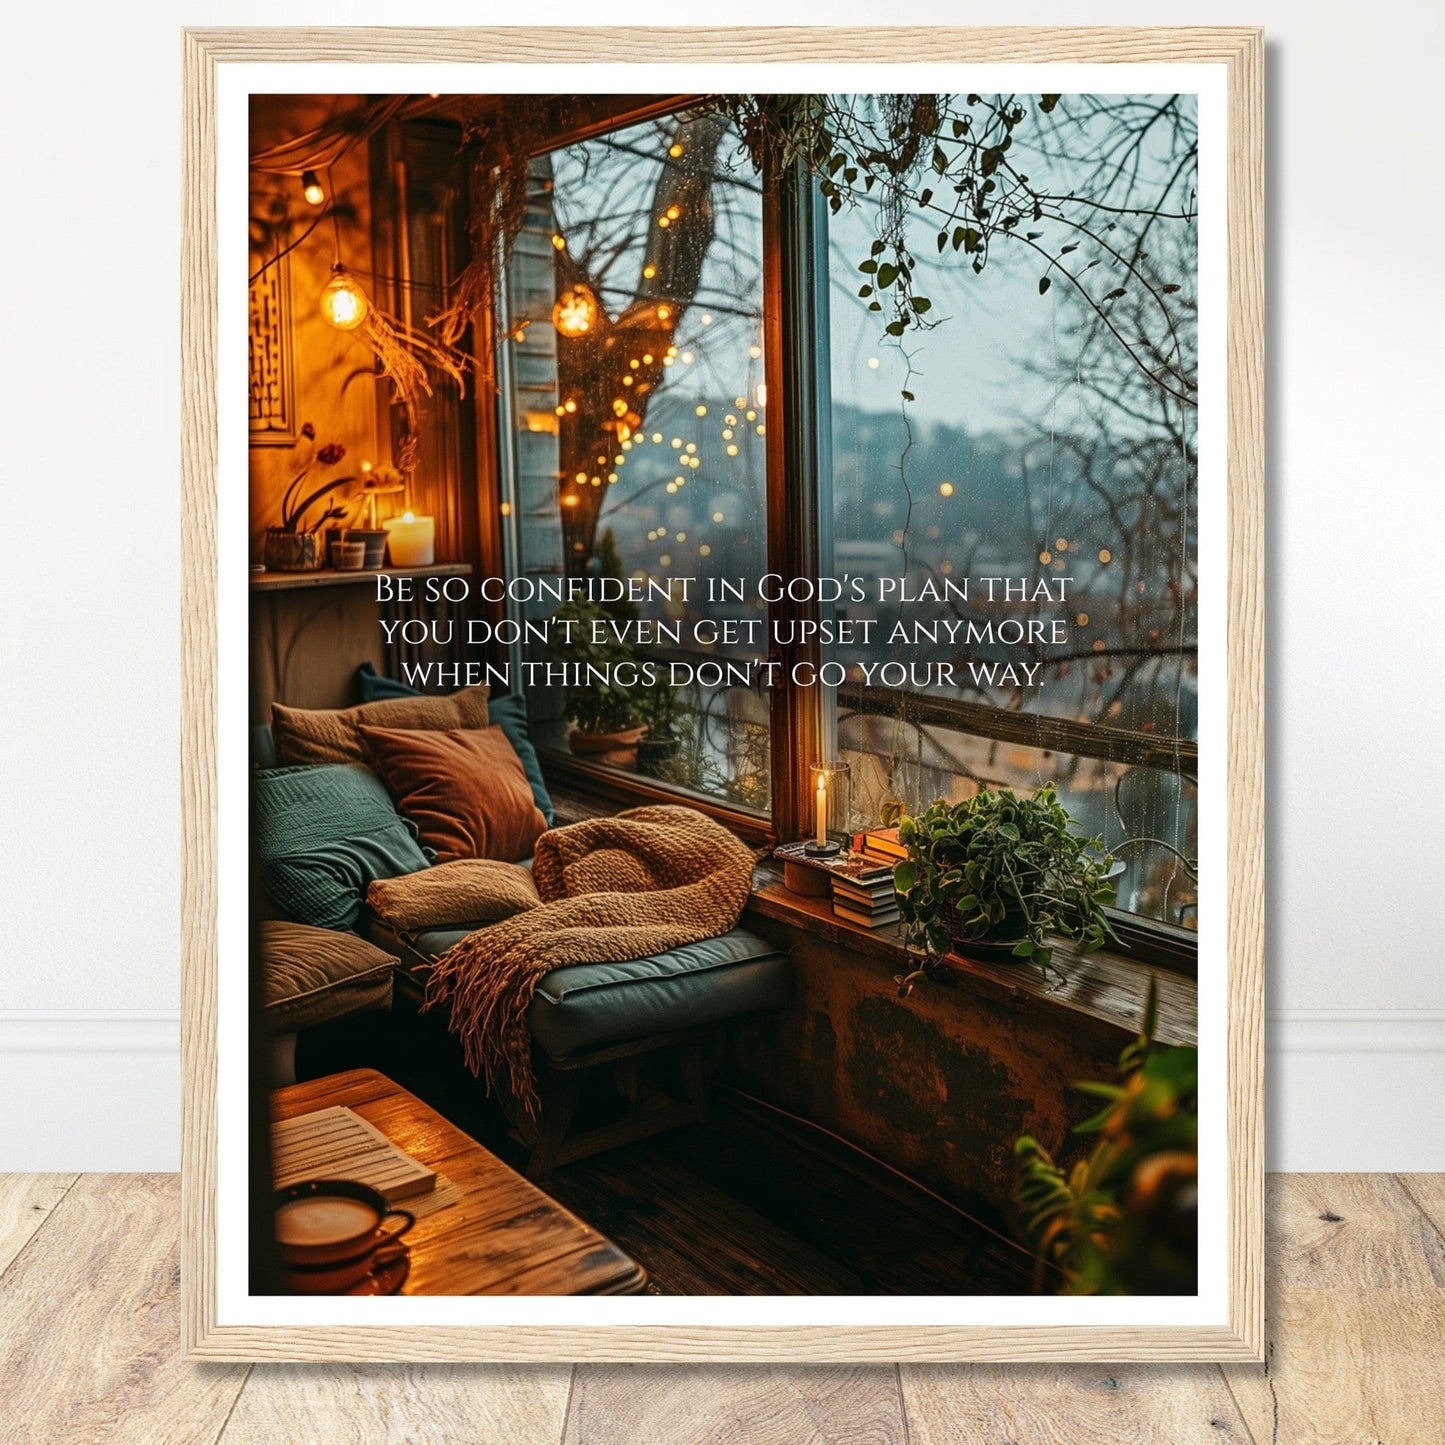 Coffee With My Father Print Material 40x50 cm / 16x20″ / Wood frame Premium Matte Paper Wooden Framed Poster